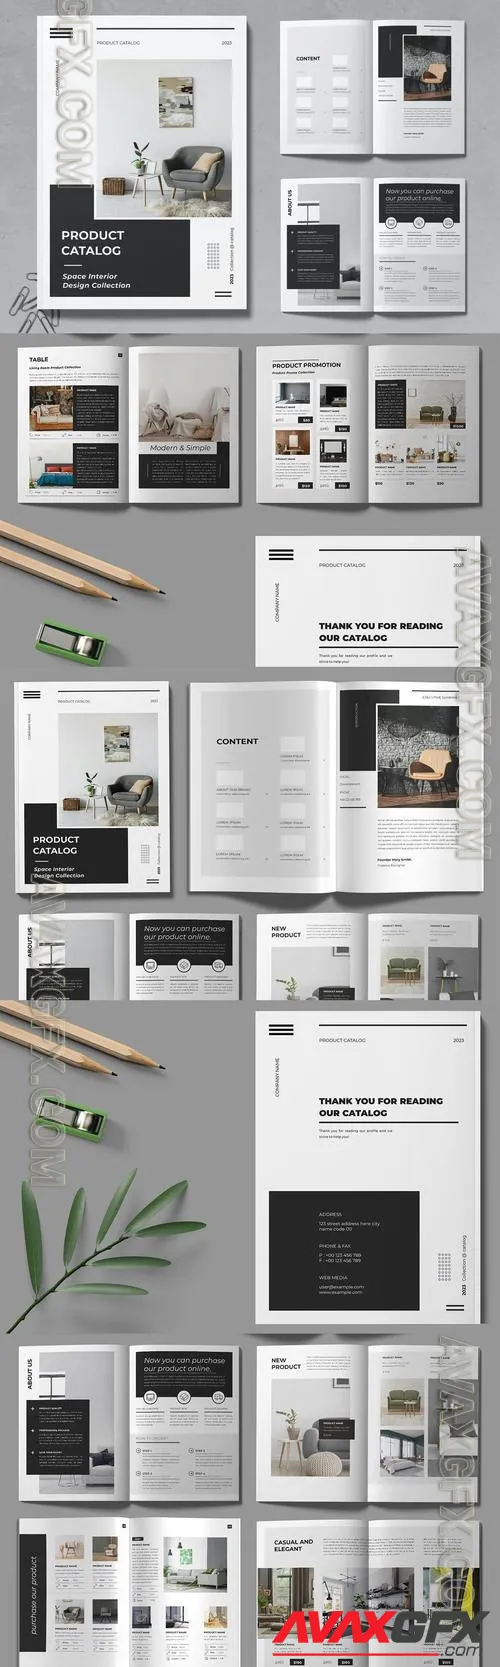 Interior Product Catalog Template